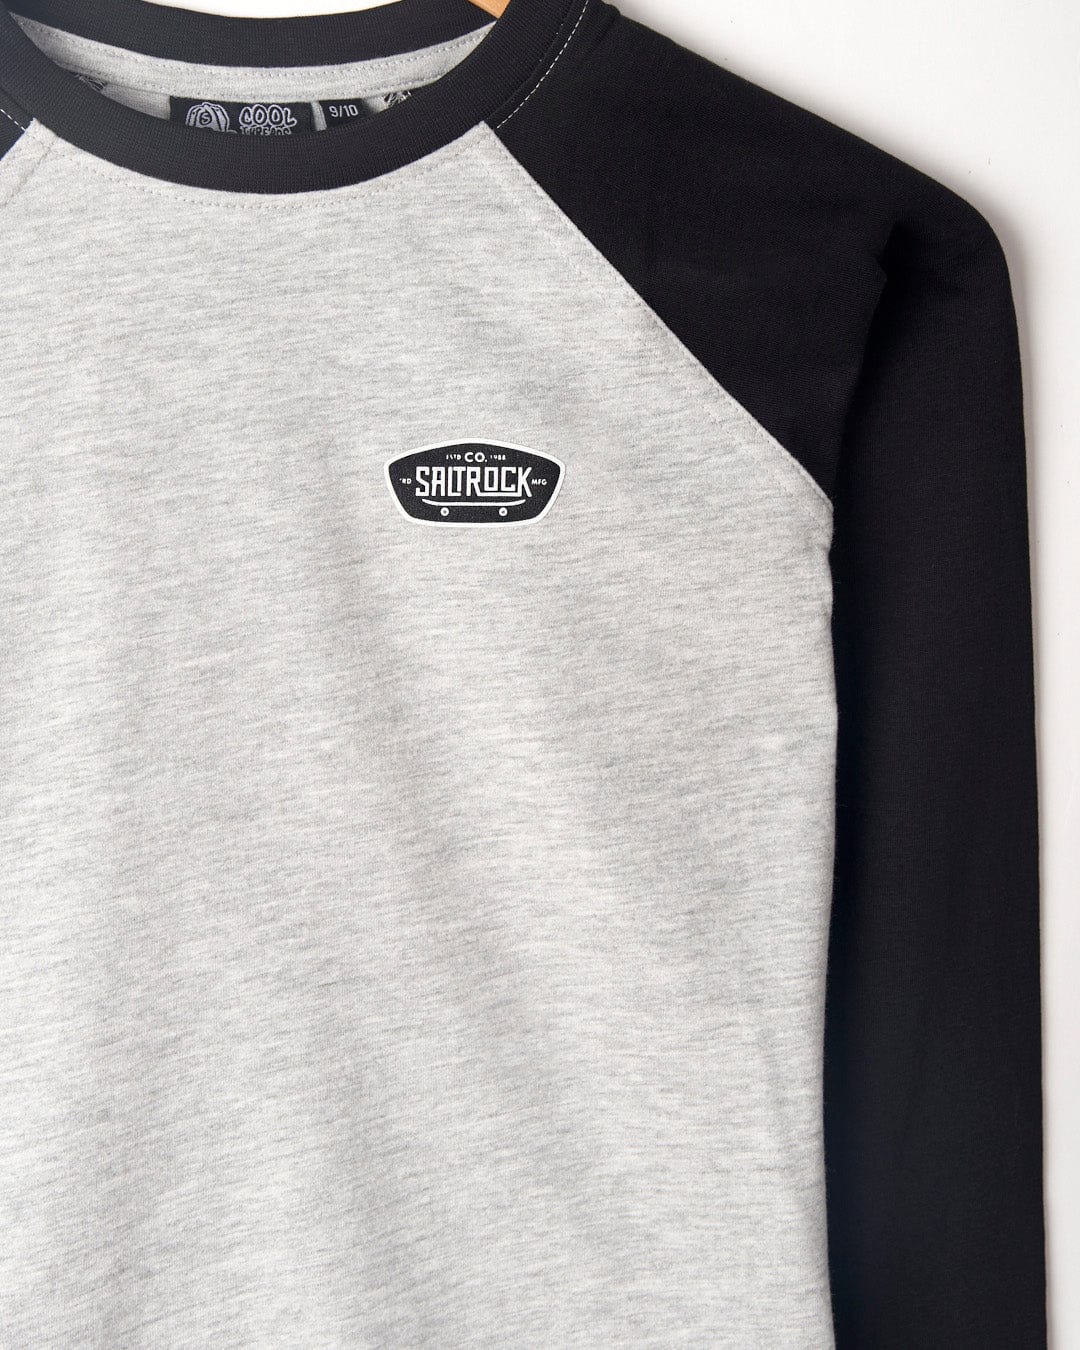 Close-up of a grey and black ***Hardskate Warp - Kids Longsleeve Raglan T-Shirt - Grey/Black*** with raglan contrast sleeves, featuring a small "Saltrock" logo on the left chest area. This stylish piece is machine washable for easy care.